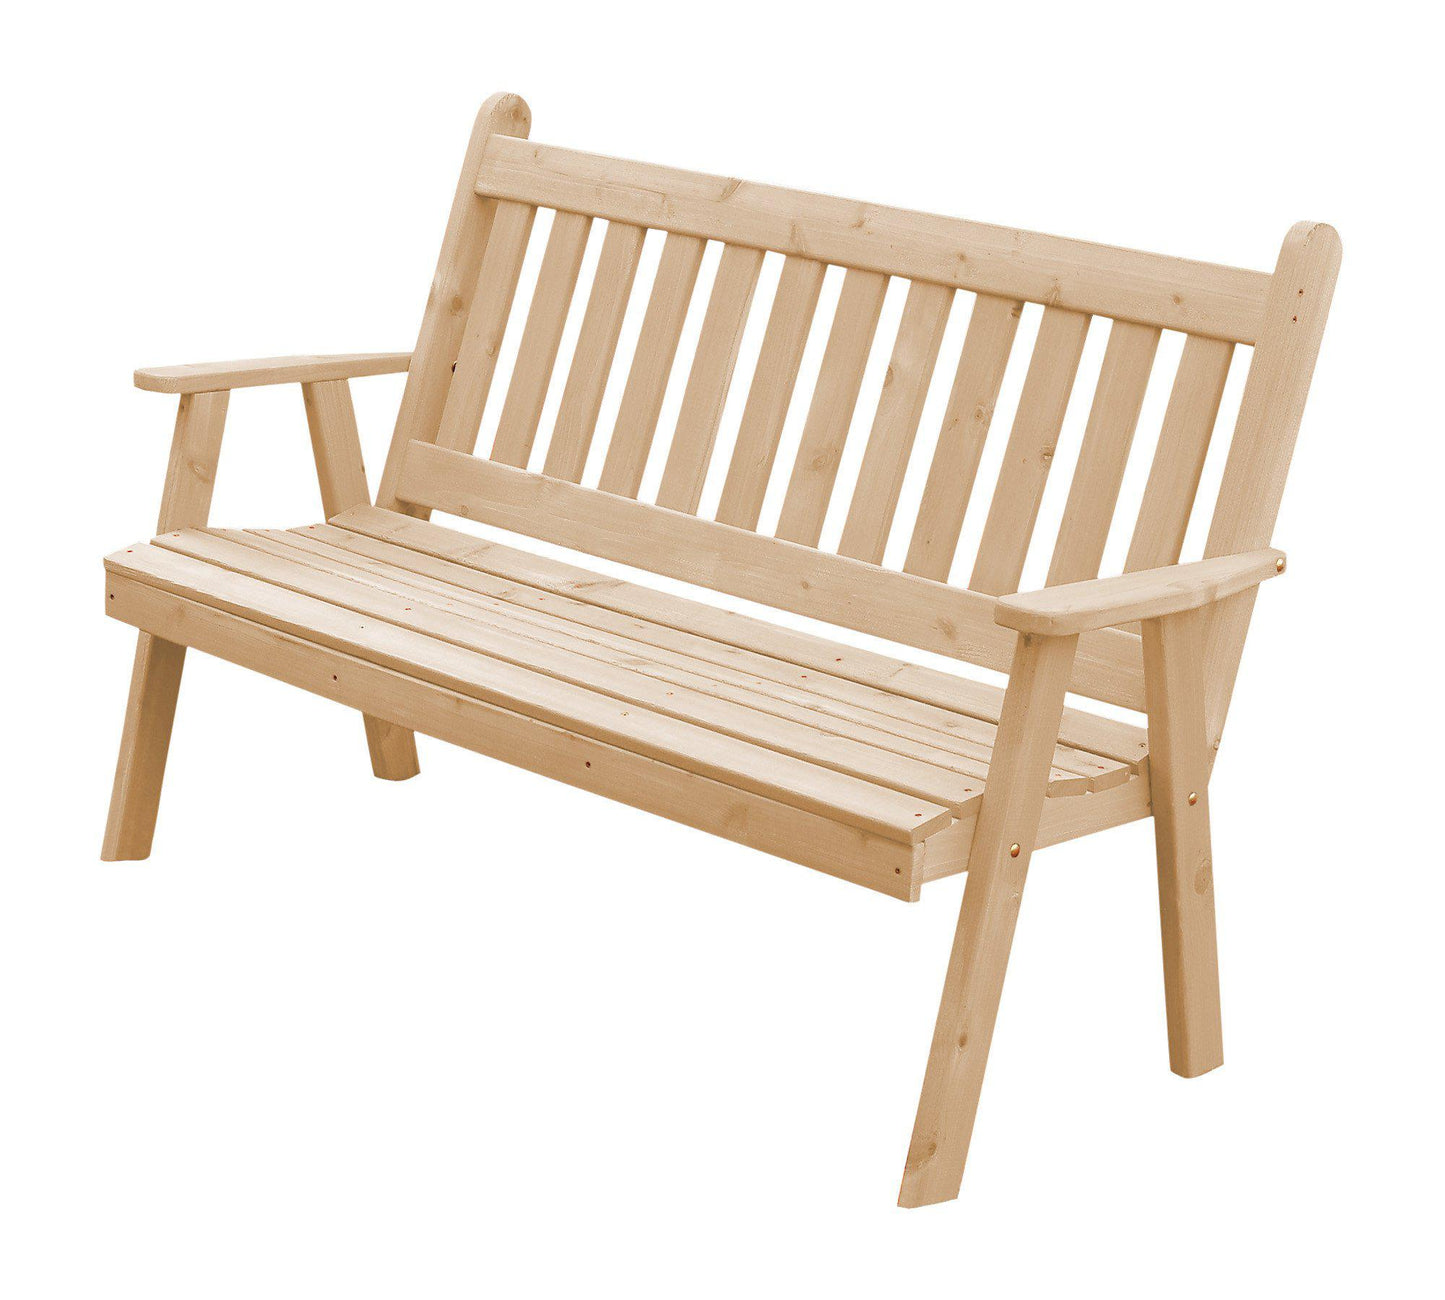 A&L Furniture Co. Western Red Cedar 4' Traditional English Garden Bench - LEAD TIME TO SHIP 2 WEEKS